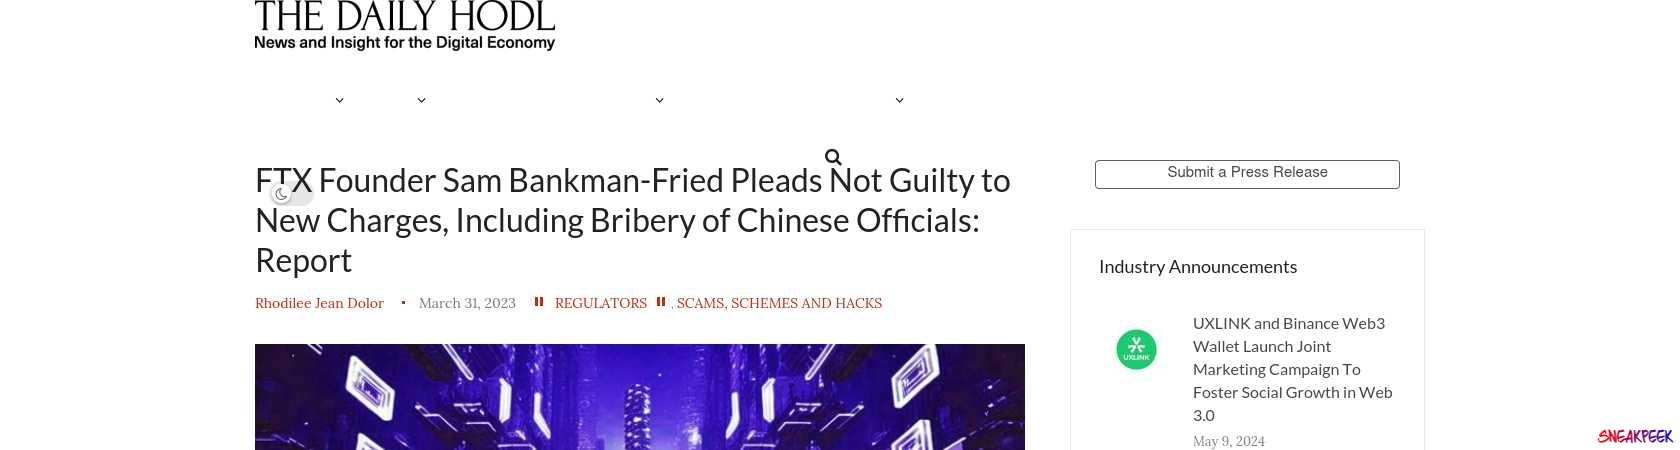 Read the full Article:  ⭲ FTX Founder Sam Bankman-Fried Pleads Not Guilty to New Charges, Including Bribery of Chinese Officials: Report